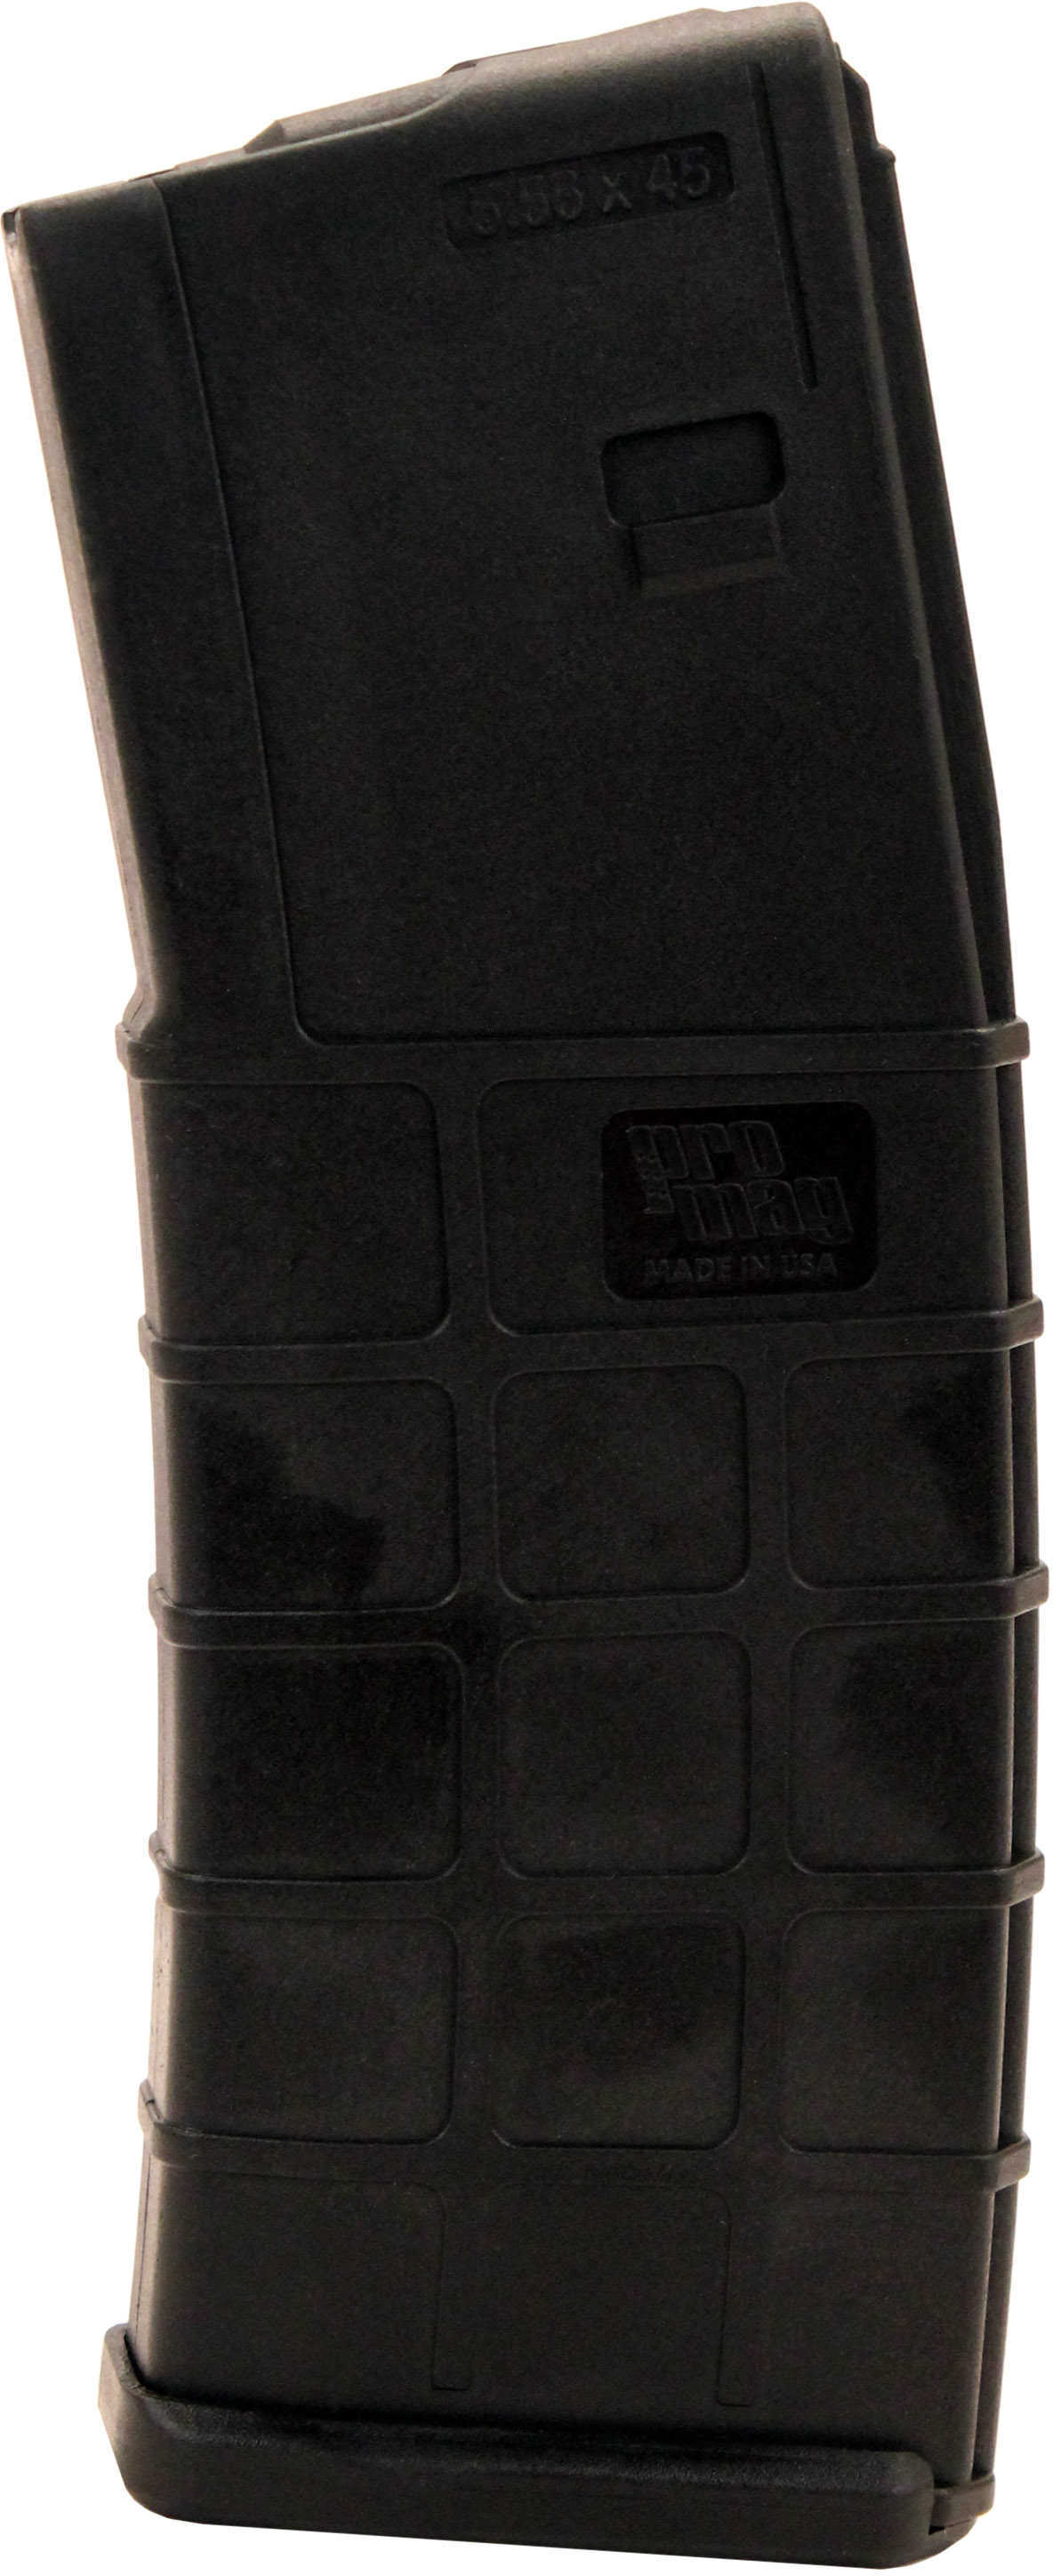 PROMAG AR-15 223/5.56 30RD BLK POLY